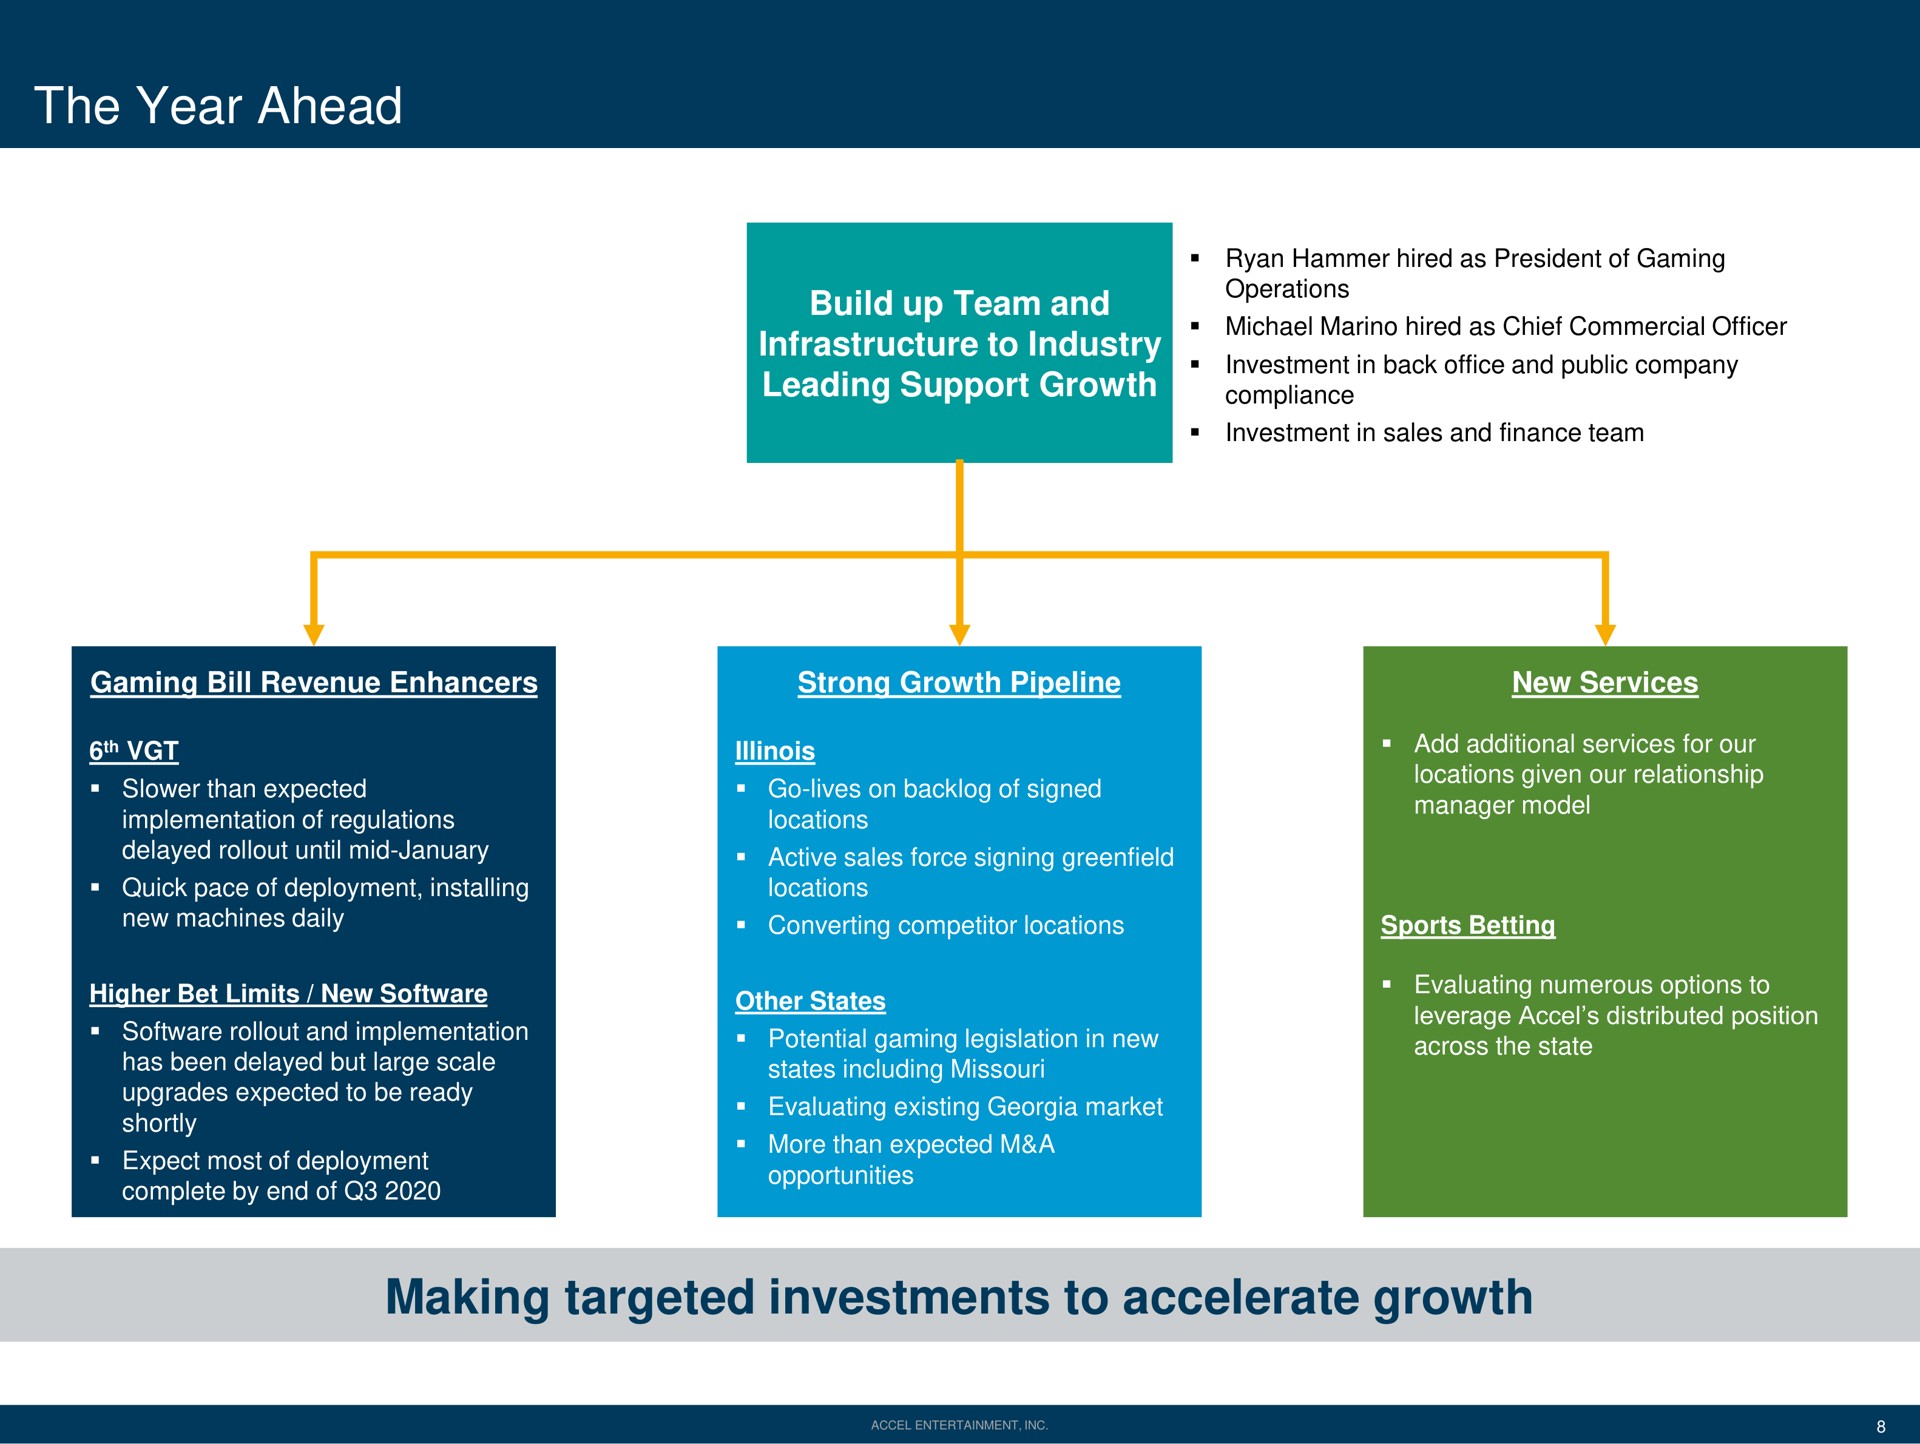 the year ahead making targeted investments to accelerate growth | Accel Entertaiment